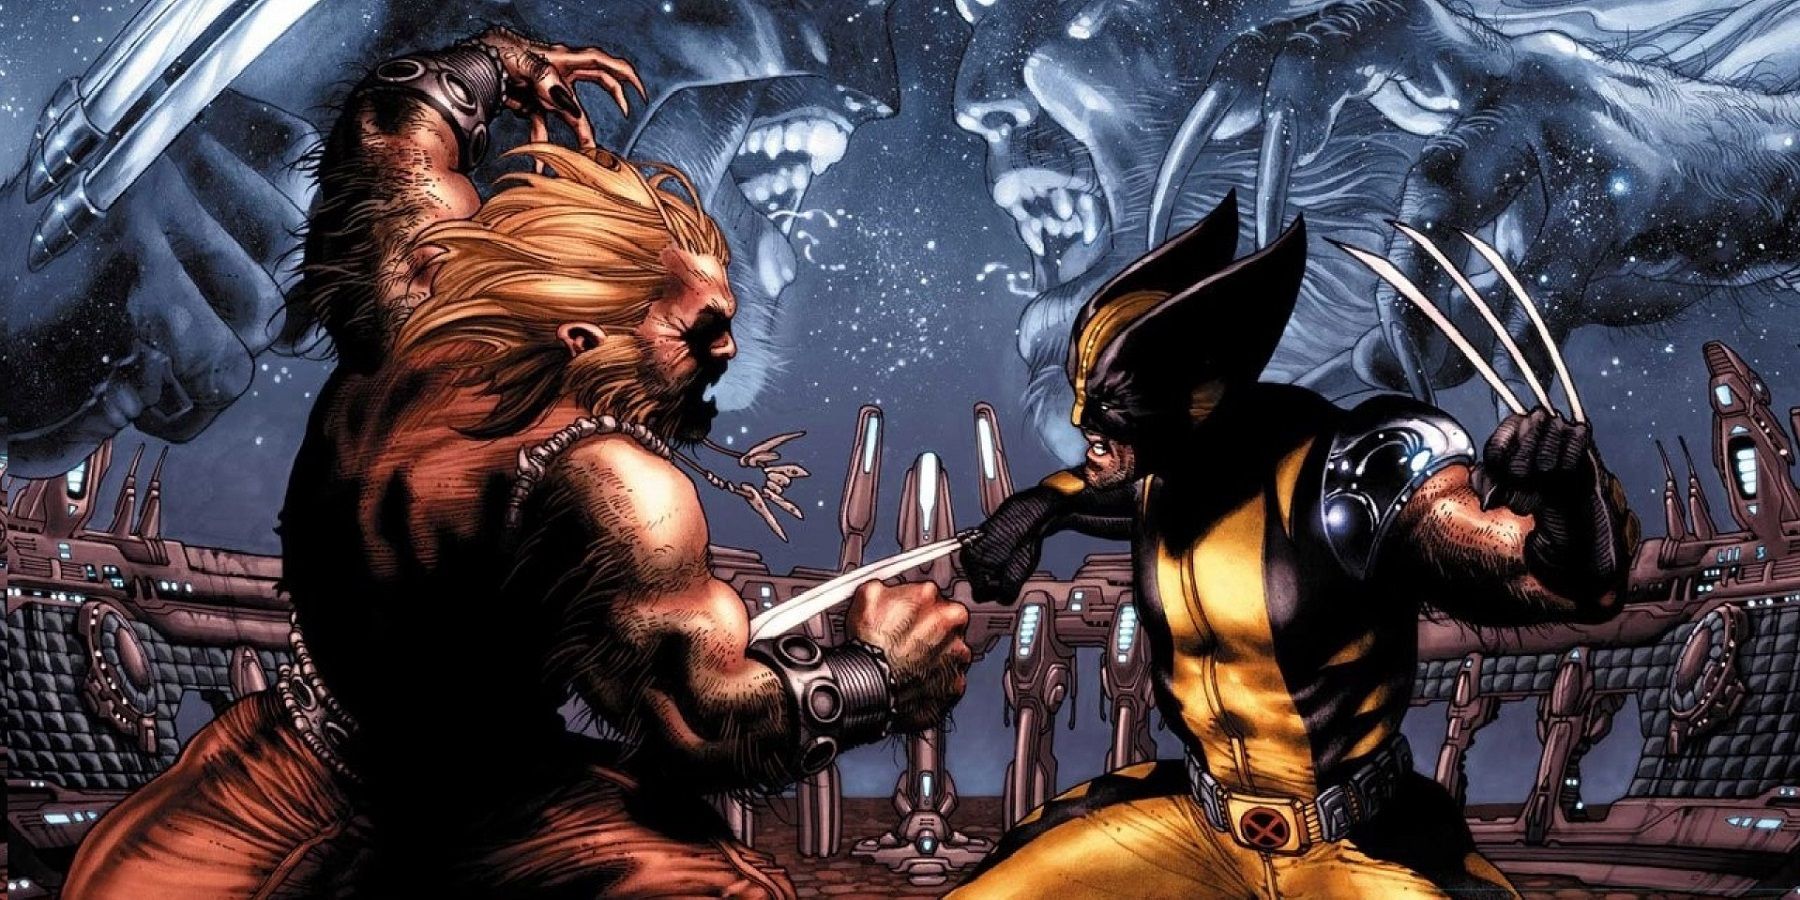 15 Characters Who Use Adamantium (Other Than Wolverine)